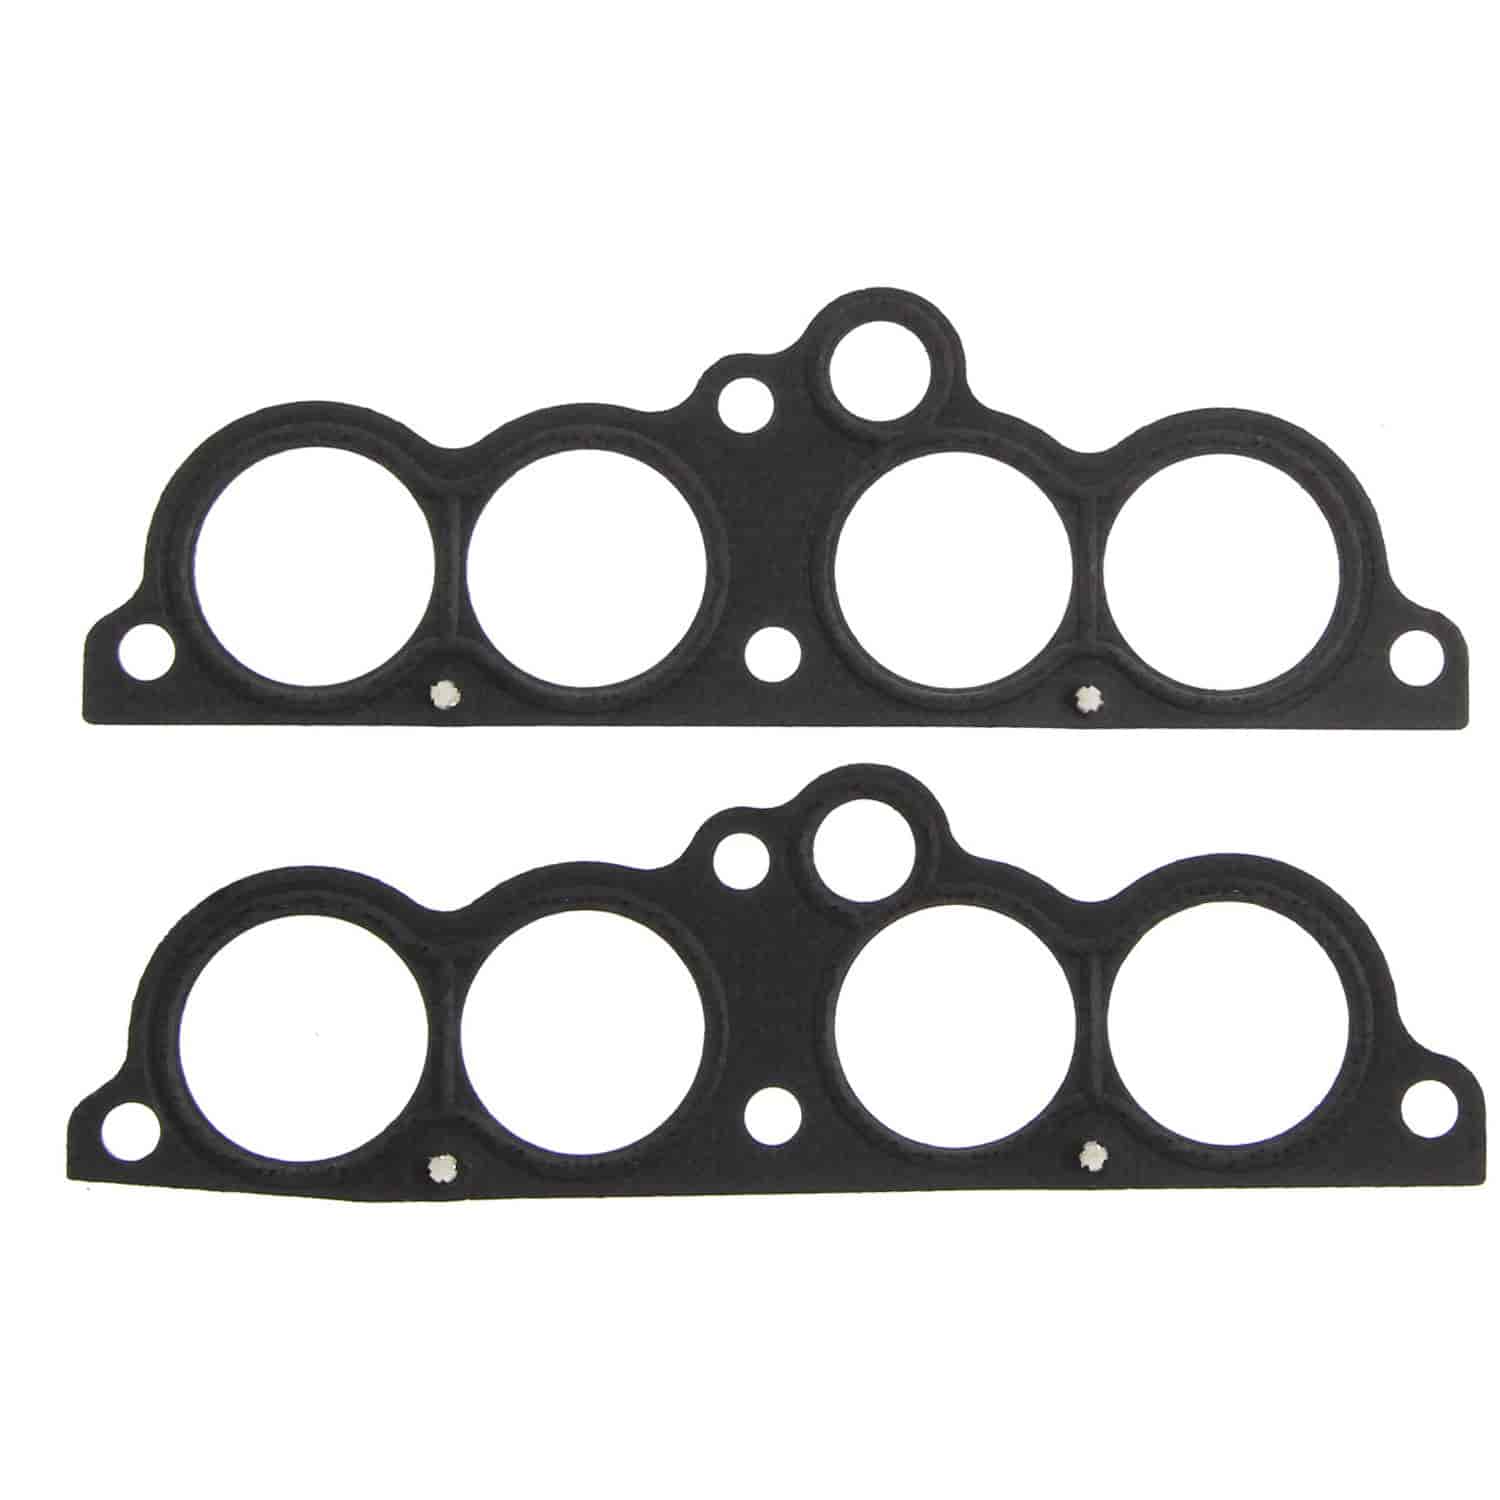 Fuel Injection Plenum Gasket 1985-1992 Small Block Chevy TPI V8 305/350